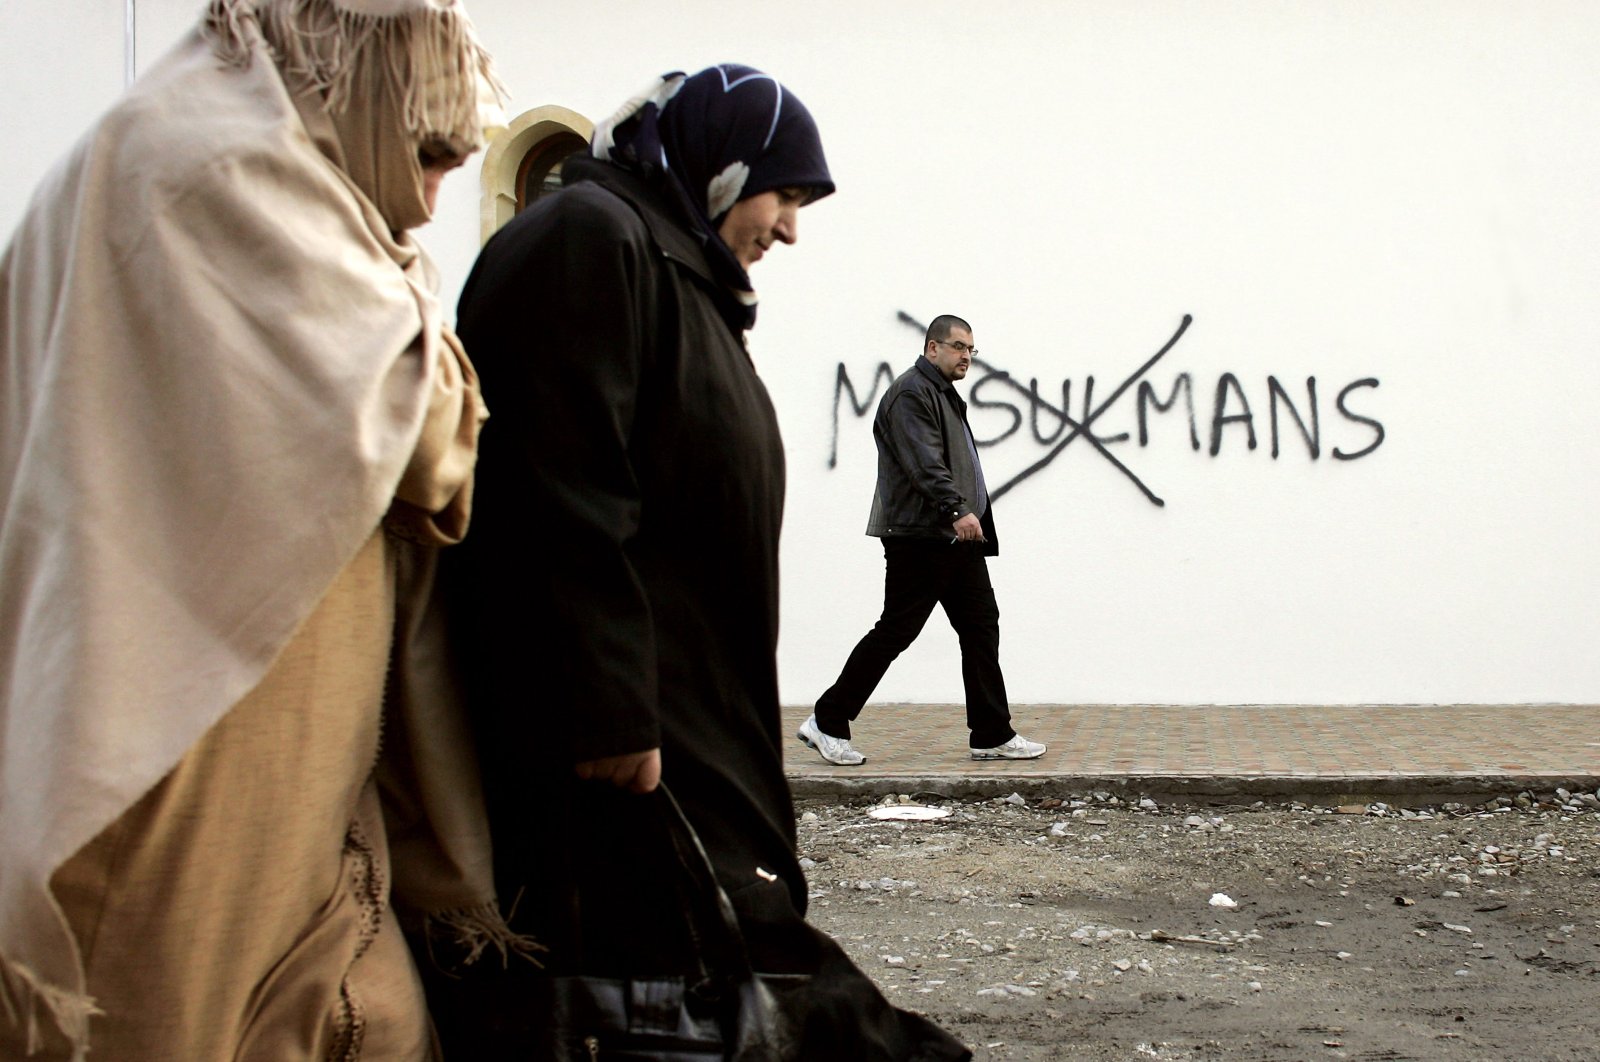 In this file photo, Muslim residents walk past racial slurs painted on the walls of a mosque in the town of Saint-Etienne in central France, Feb. 8, 2010. (Laurent Cipriani Photo via AP)